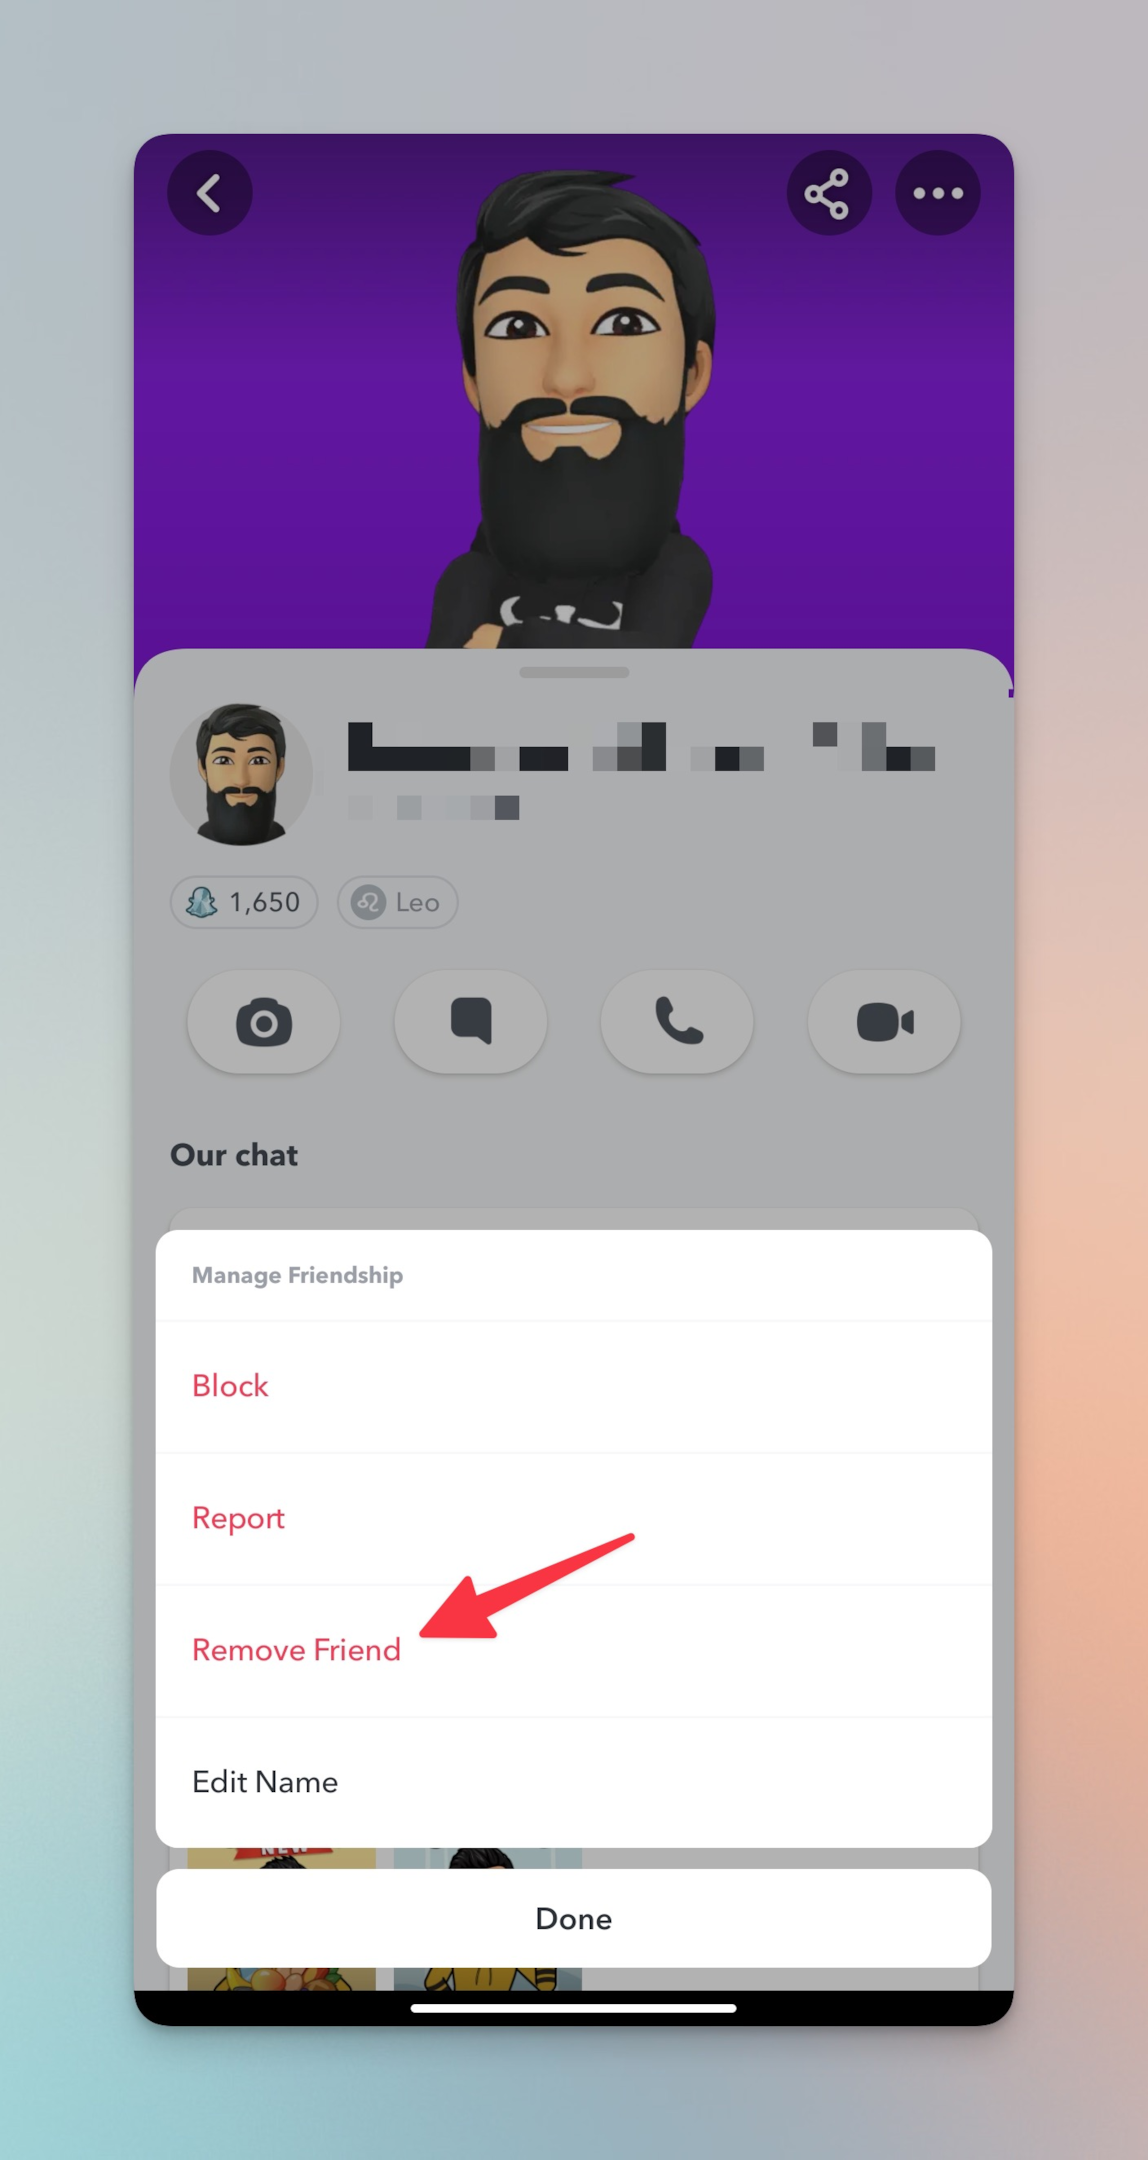 Remote.tools is pointing to Remove Friend button. Tap on it to unfriend the profile owner on Snapchat. You will need to confirm your action in the next step.